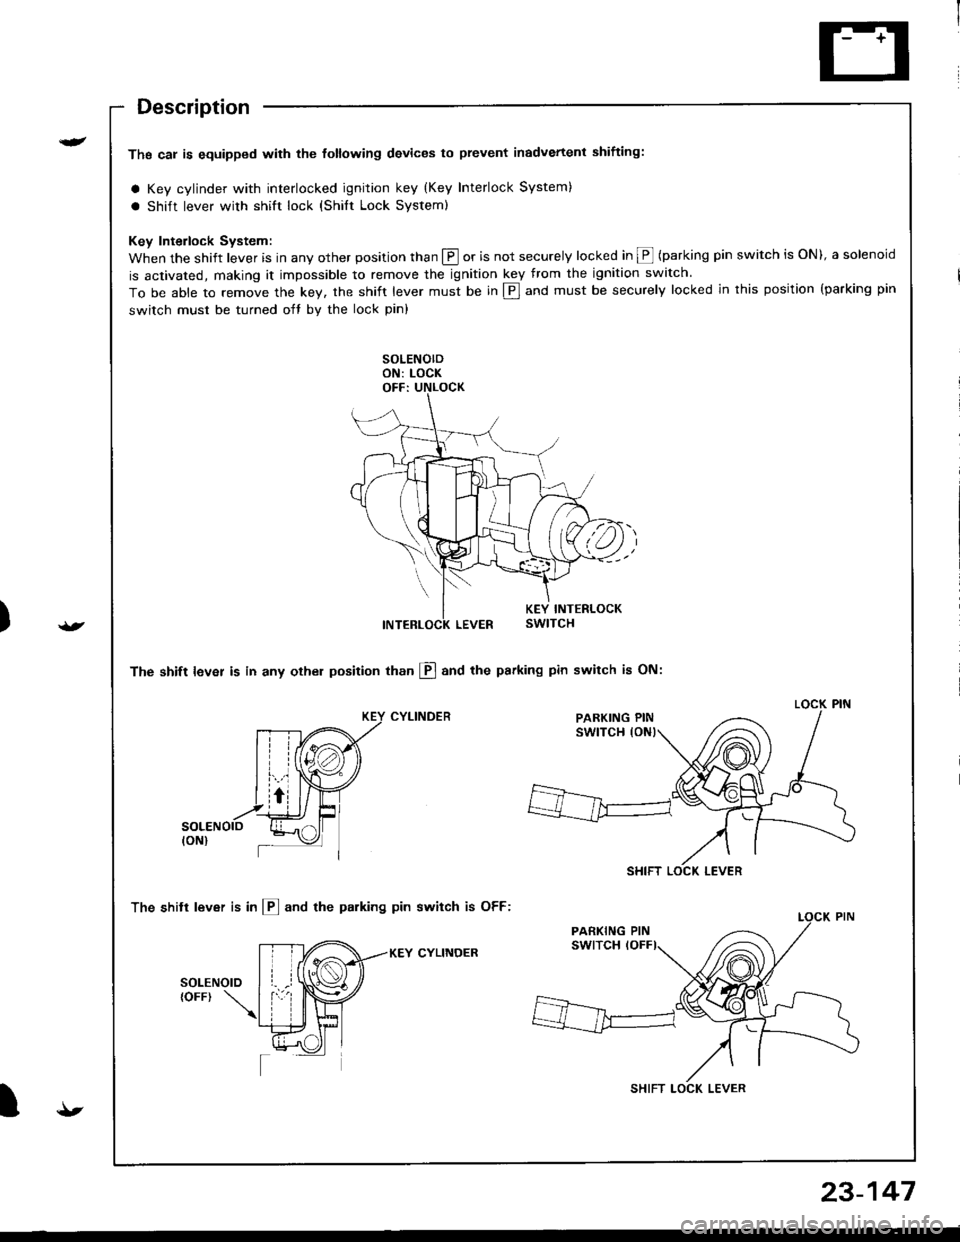 HONDA INTEGRA 1998 4.G Workshop Manual )
t
t
Description
Ths cal is equipped with the tottowing devices to prevent inadvertenl shifting:
a Key cylinder with interlocked ignition key (Key Interlock System)
a shift lever with shift lock (shi